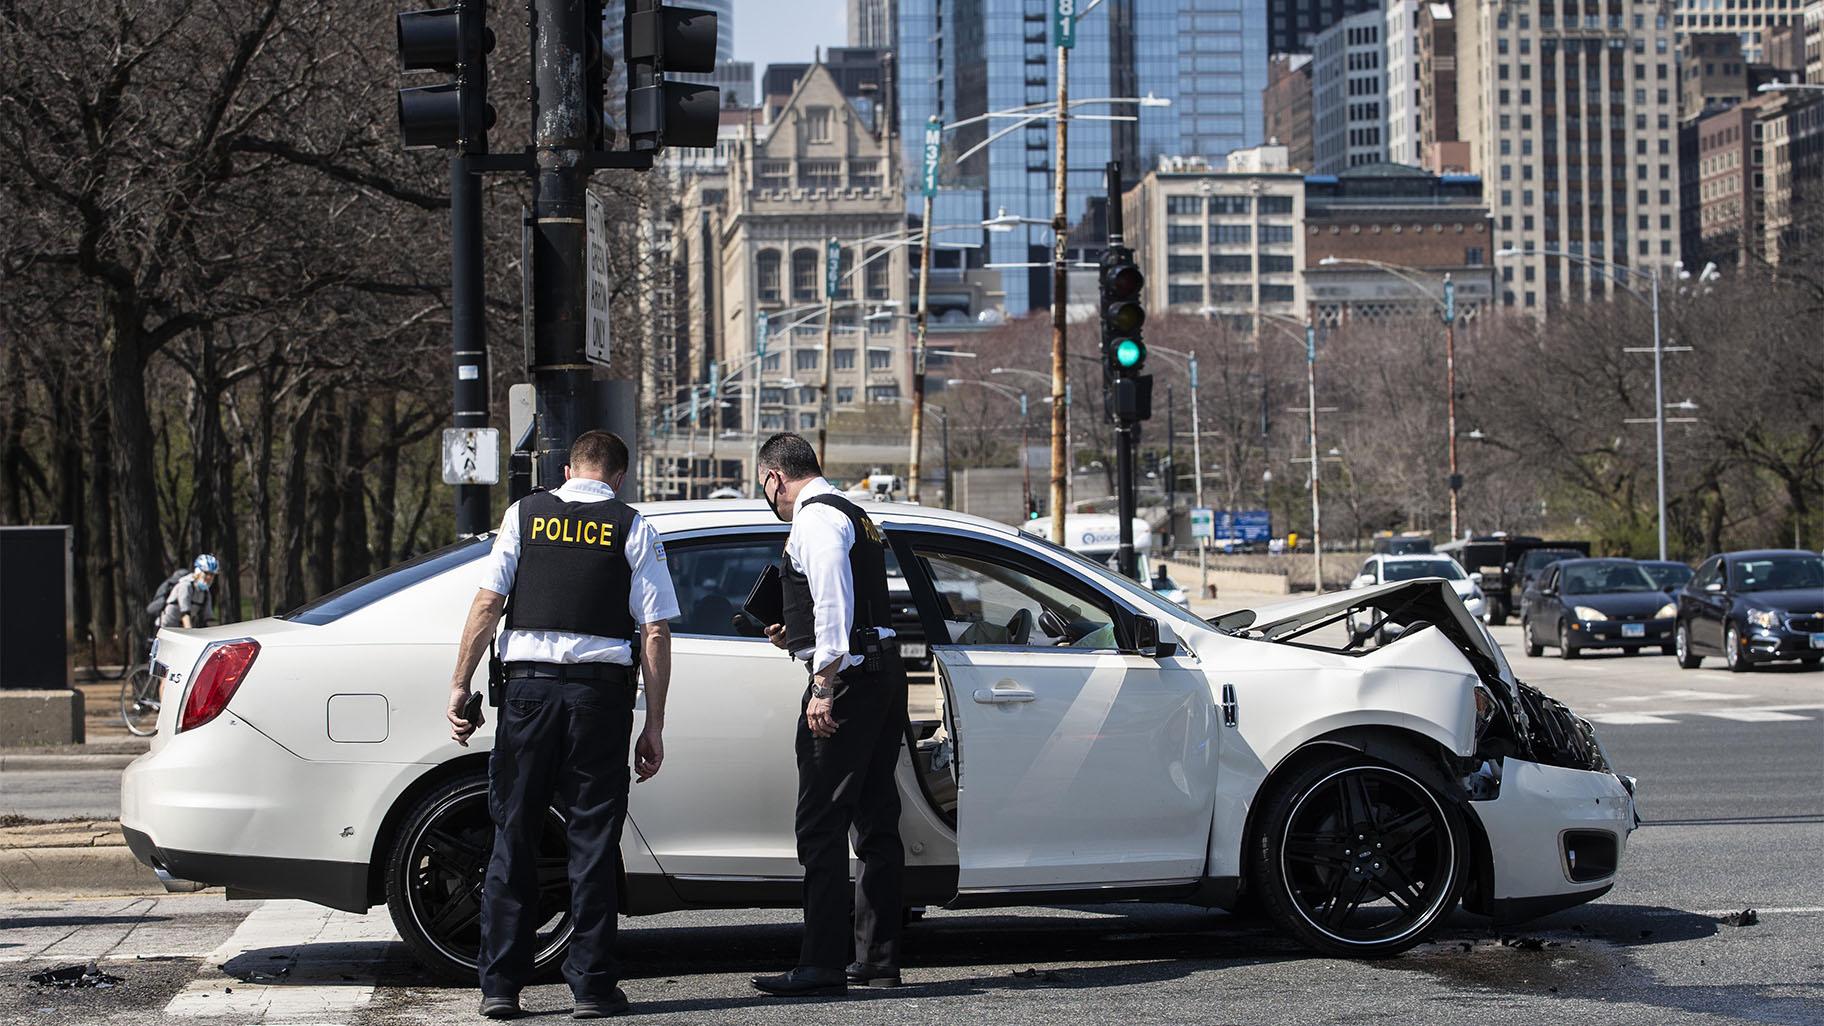 Chicago police investigate in the northbound lanes of Lake Shore Drive at East Monroe Street, where a 2-year-old boy was shot in the head while he was traveling inside a car near Grant Park, Tuesday, April 6, 2021. (Ashlee Rezin Garcia / Chicago Sun-Times via AP)